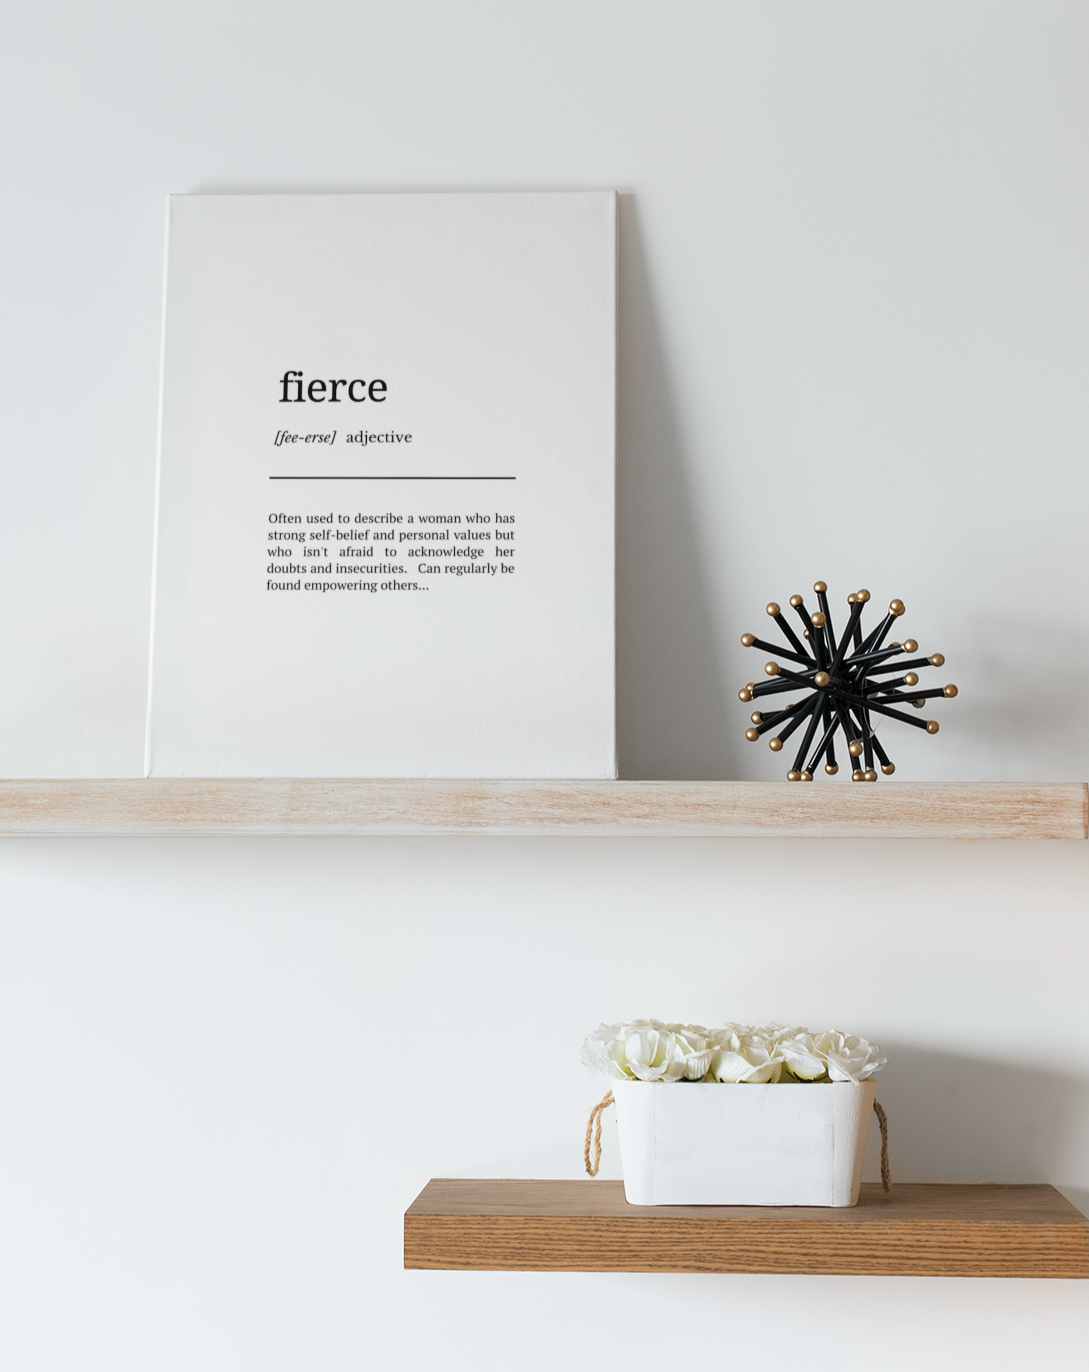 Fierce definition digital wall art - JPG download in five different sizes  with instructions